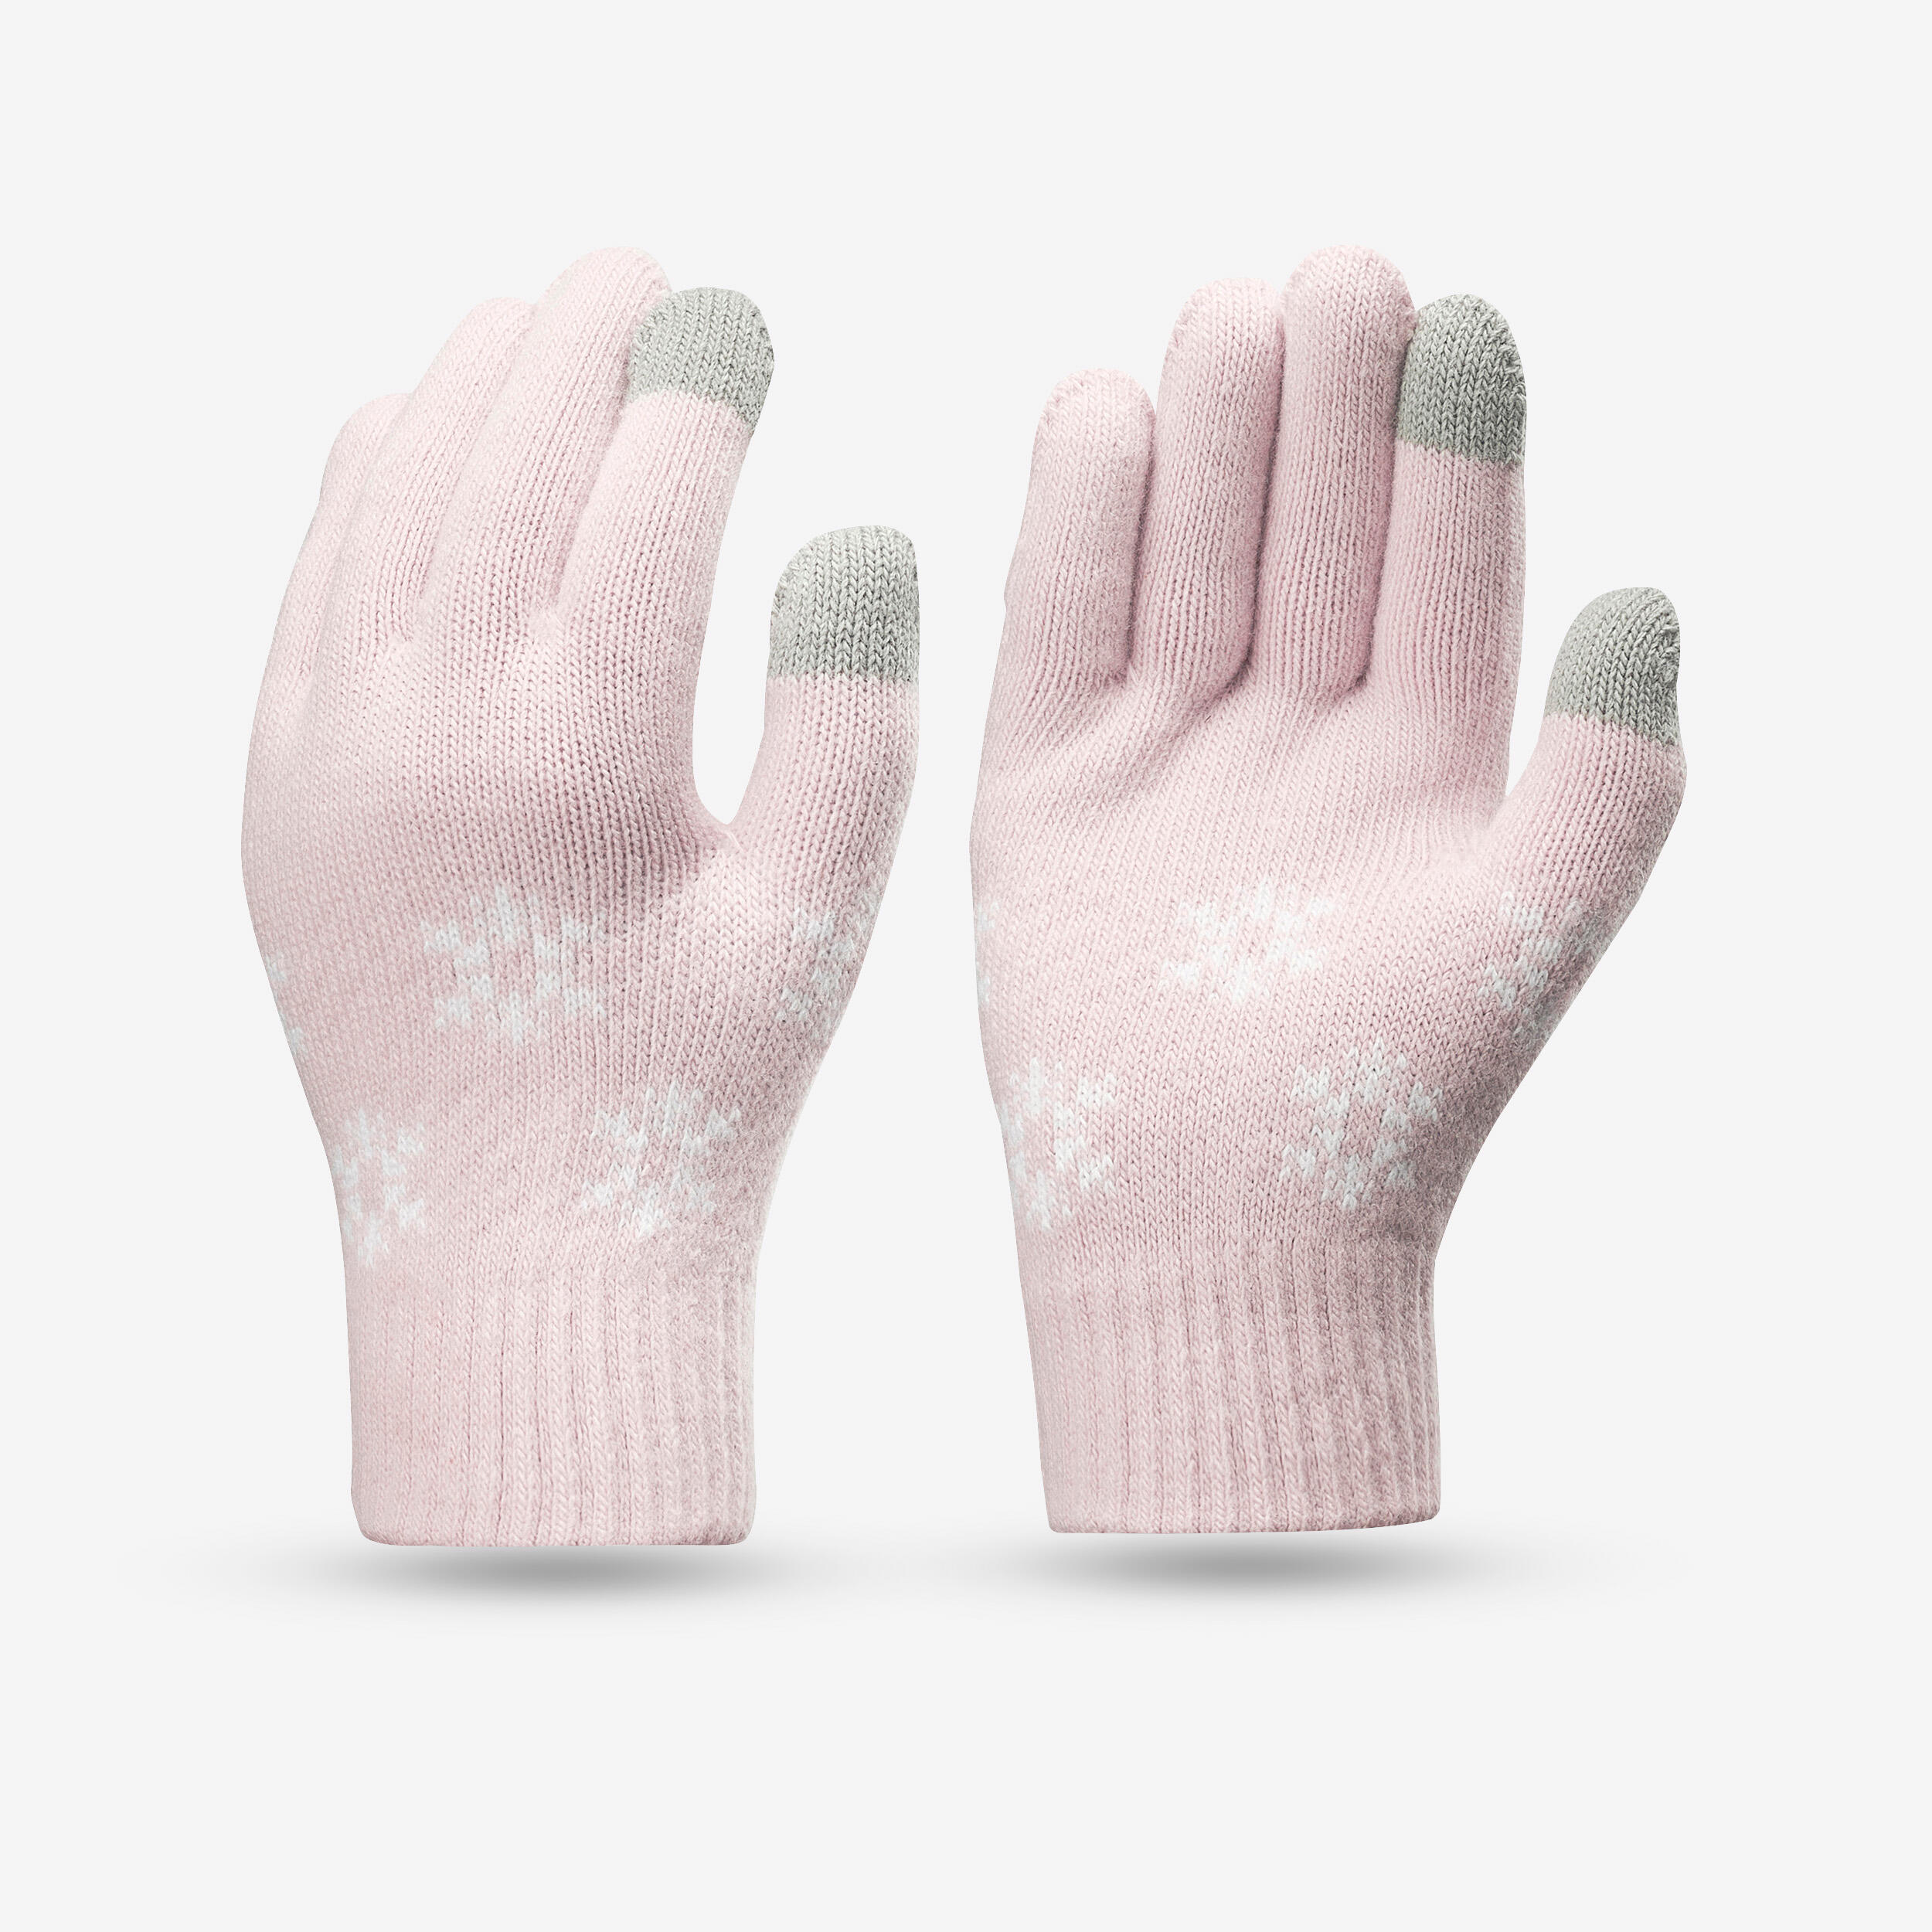 QUECHUA KIDS’ TOUCHSCREEN COMPATIBLE HIKING GLOVES - SH100 KNITTED - AGED 4-14 YEARS